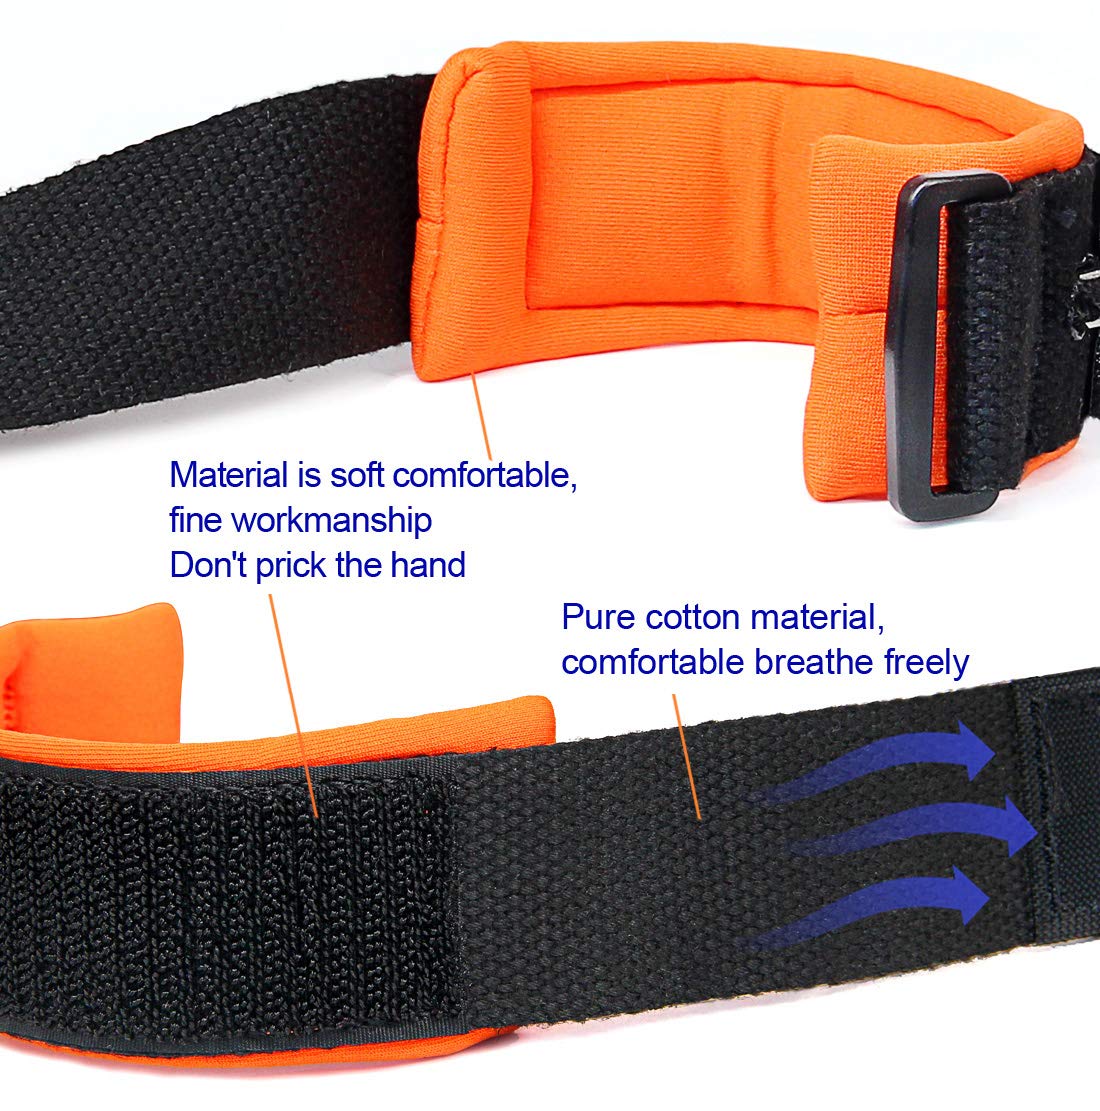 Blisstime Anti Lost Wrist Link Safety Wrist Link for Toddlers, Babies & Kids.